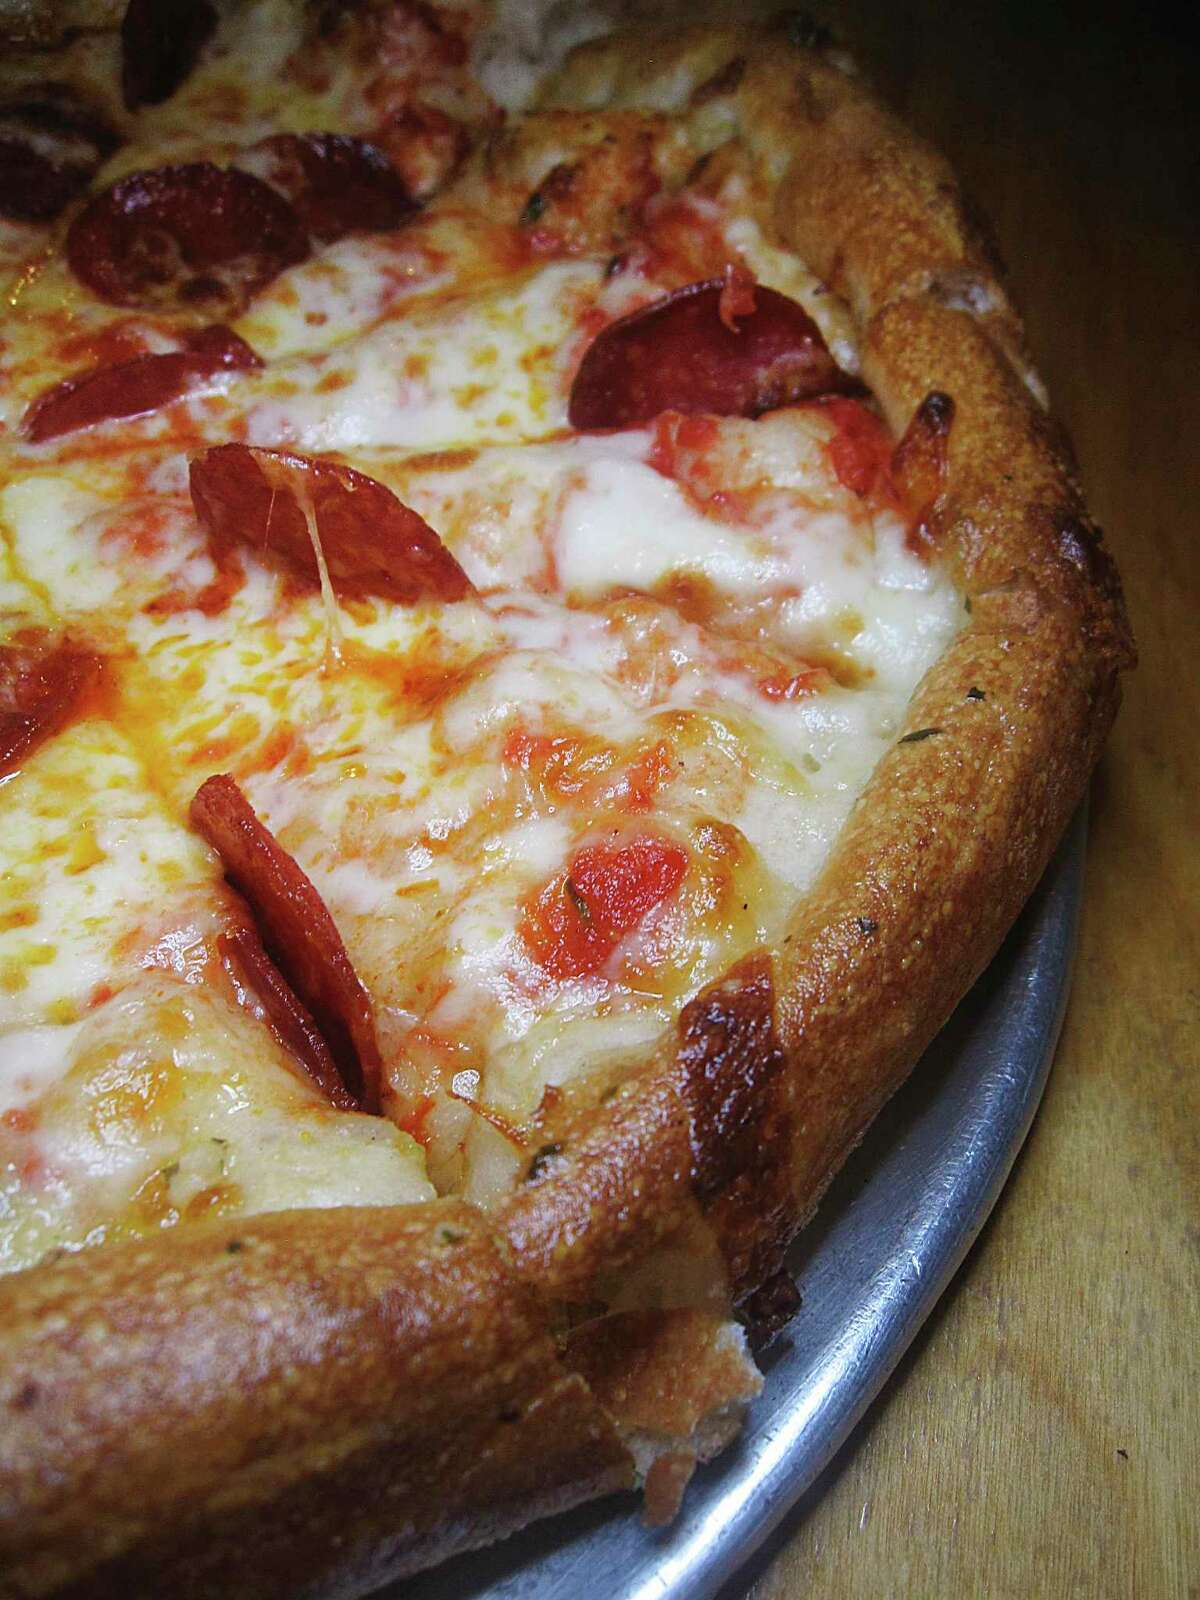 A pepperoni pizza is served on a crust infused with garlic and herbs at Tank's Pizza.